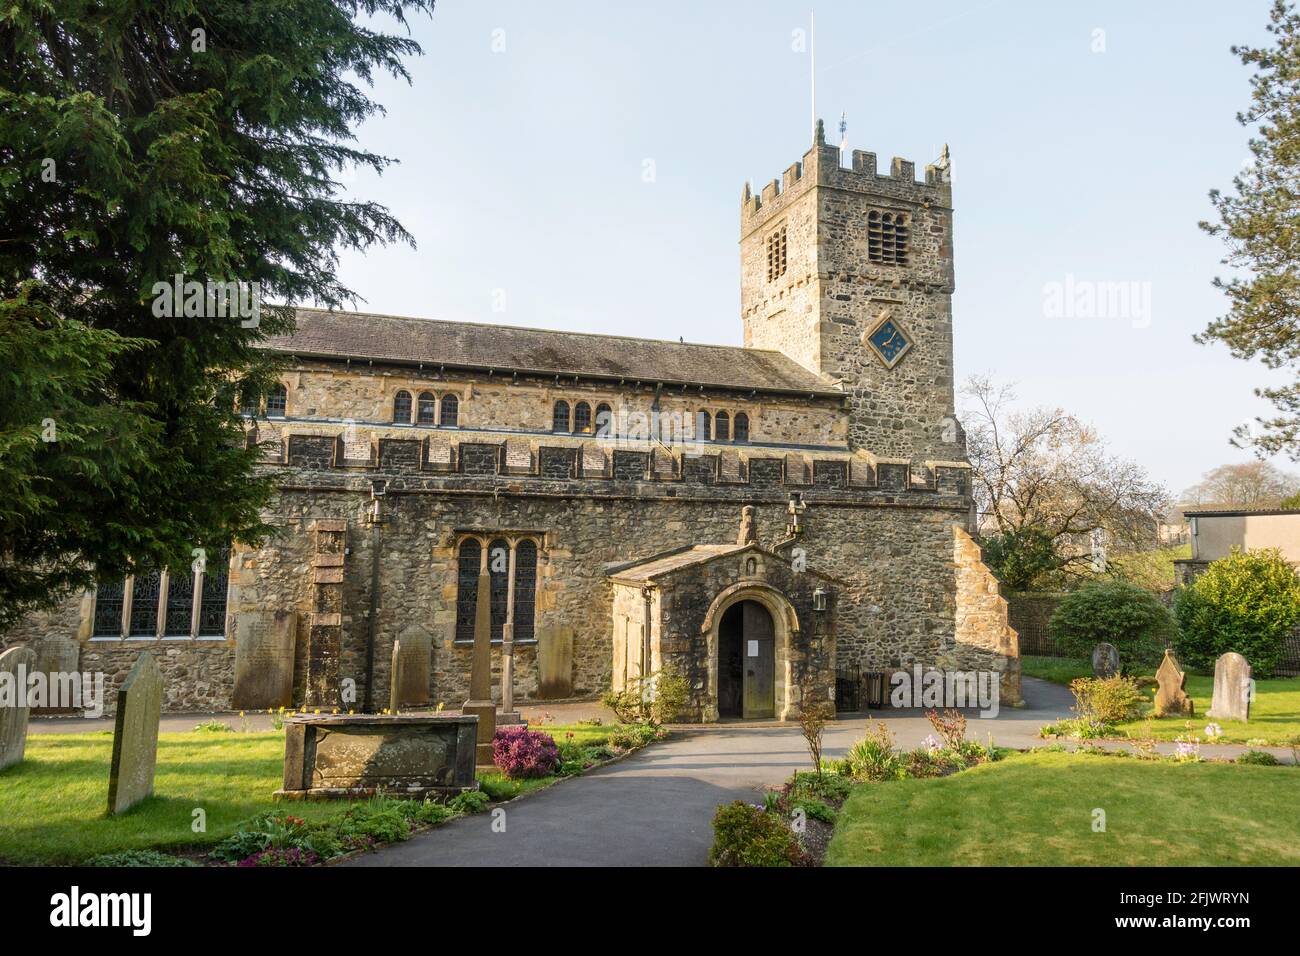 The church of St Andrew in Sedburgh, Cumbria, England UK Stock Photo